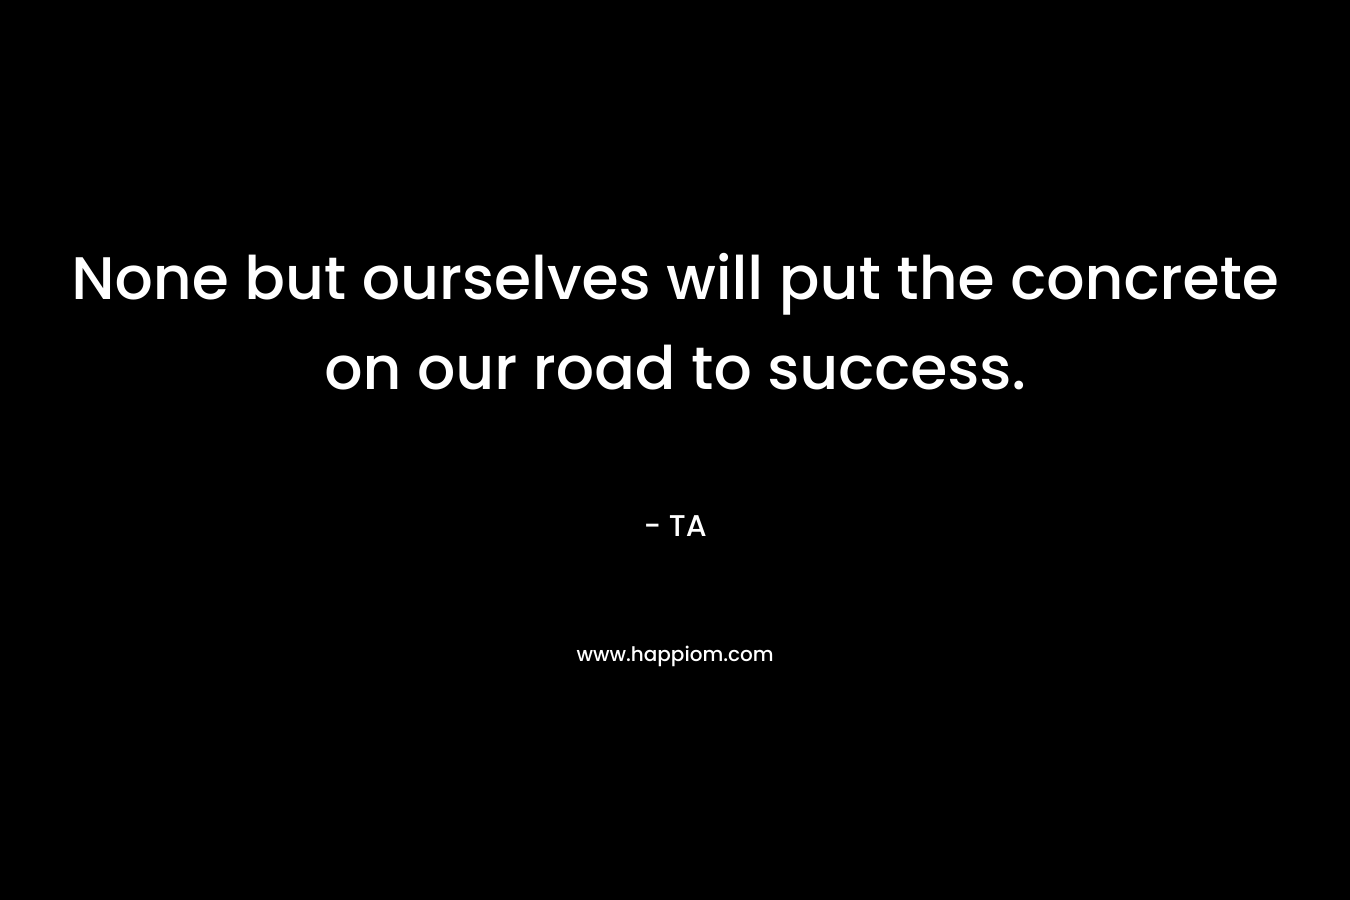 None but ourselves will put the concrete on our road to success.